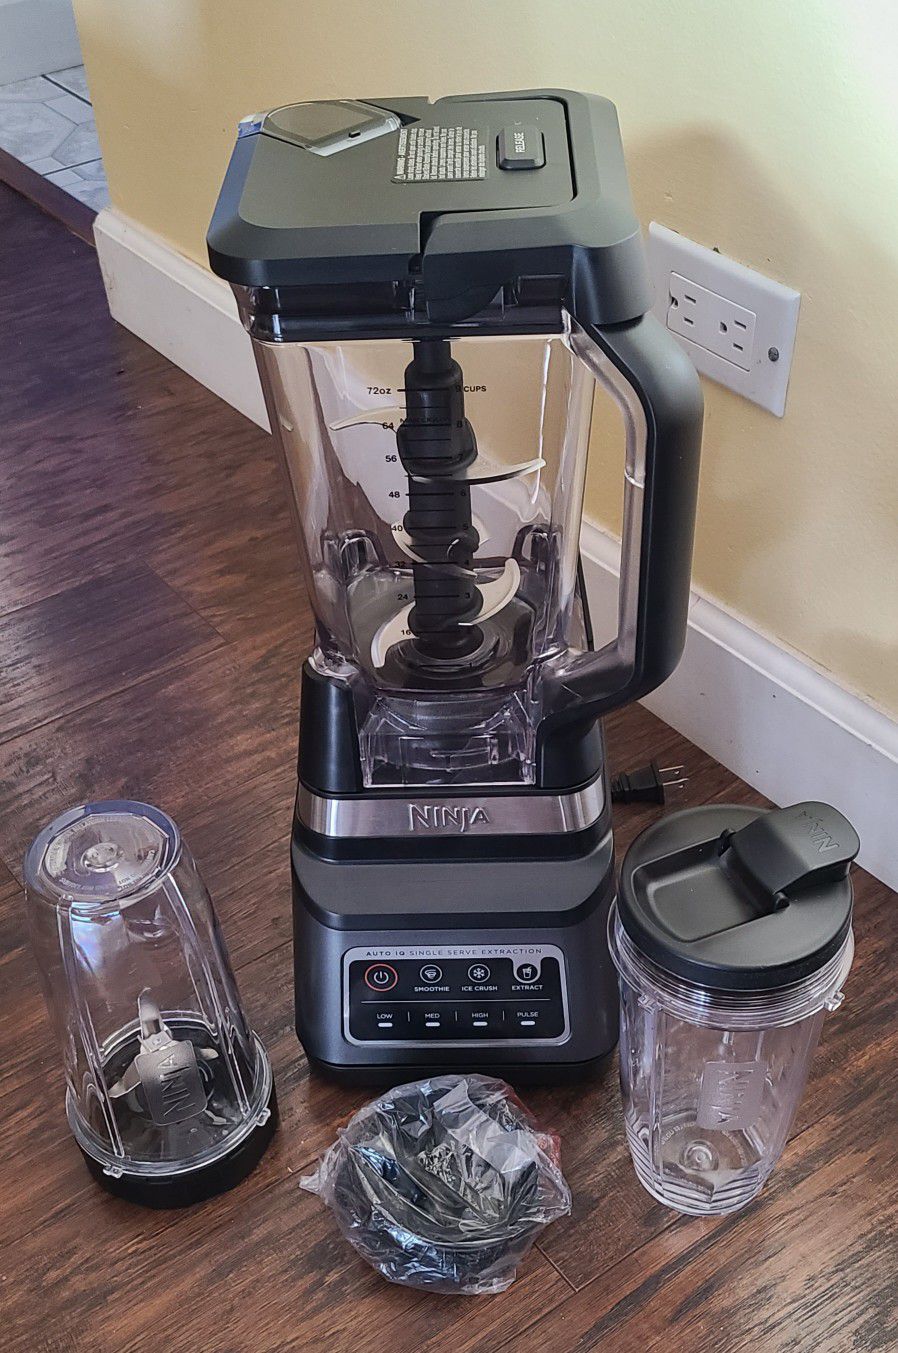 Ninja Professional Plus Blender DUO With Auto -IQ for Sale in Hanover Park,  IL - OfferUp